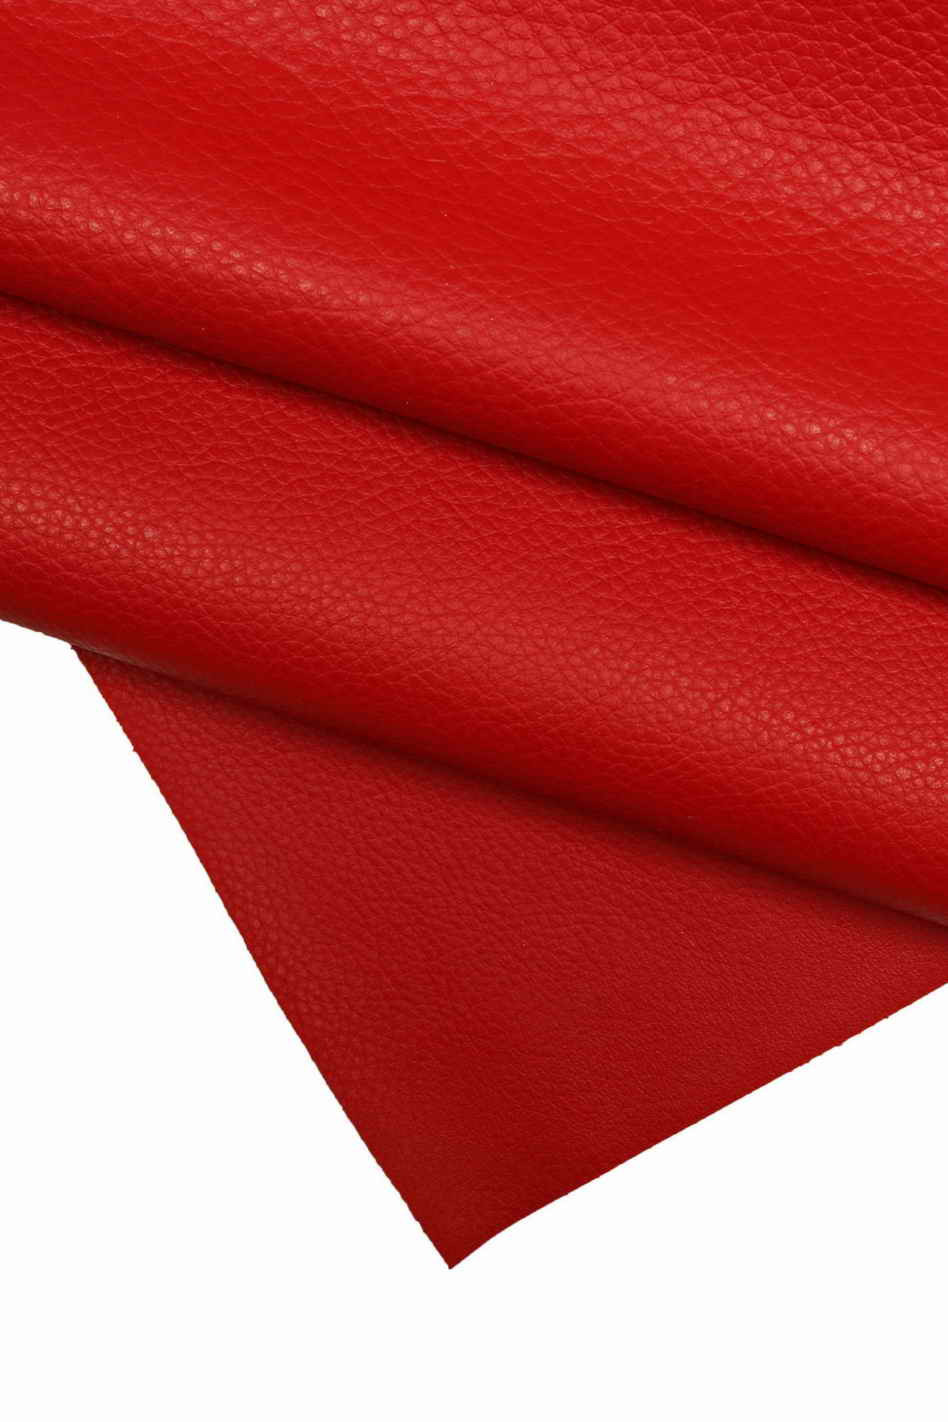  Leather Piece - Red Shallow Lizard Cow Hide Genuine